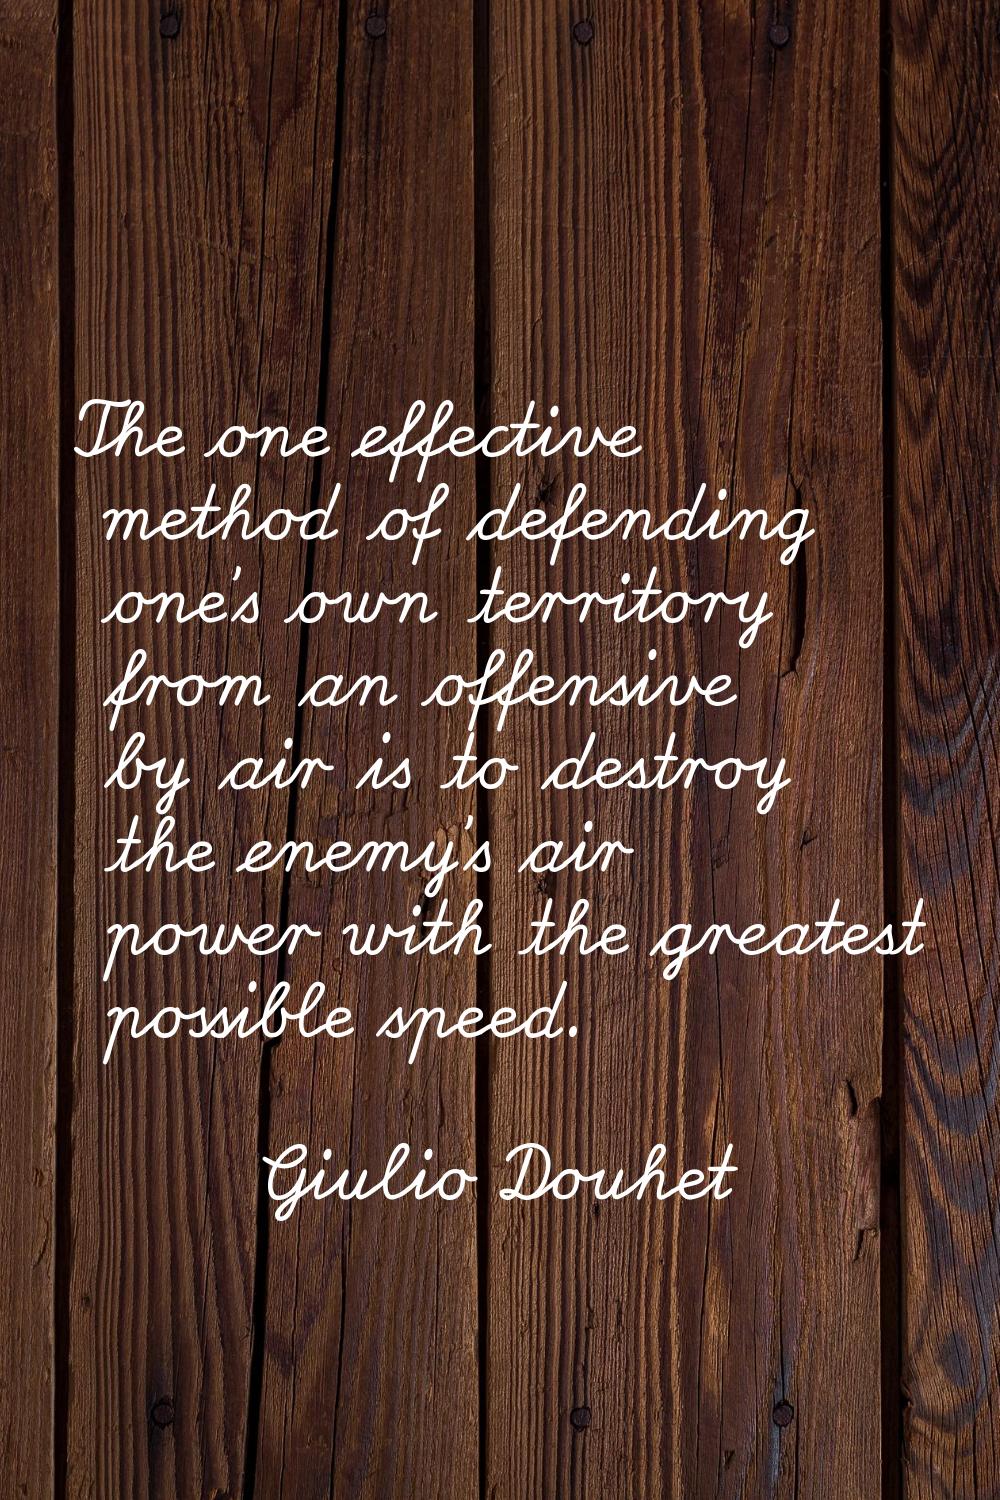 The one effective method of defending one's own territory from an offensive by air is to destroy th